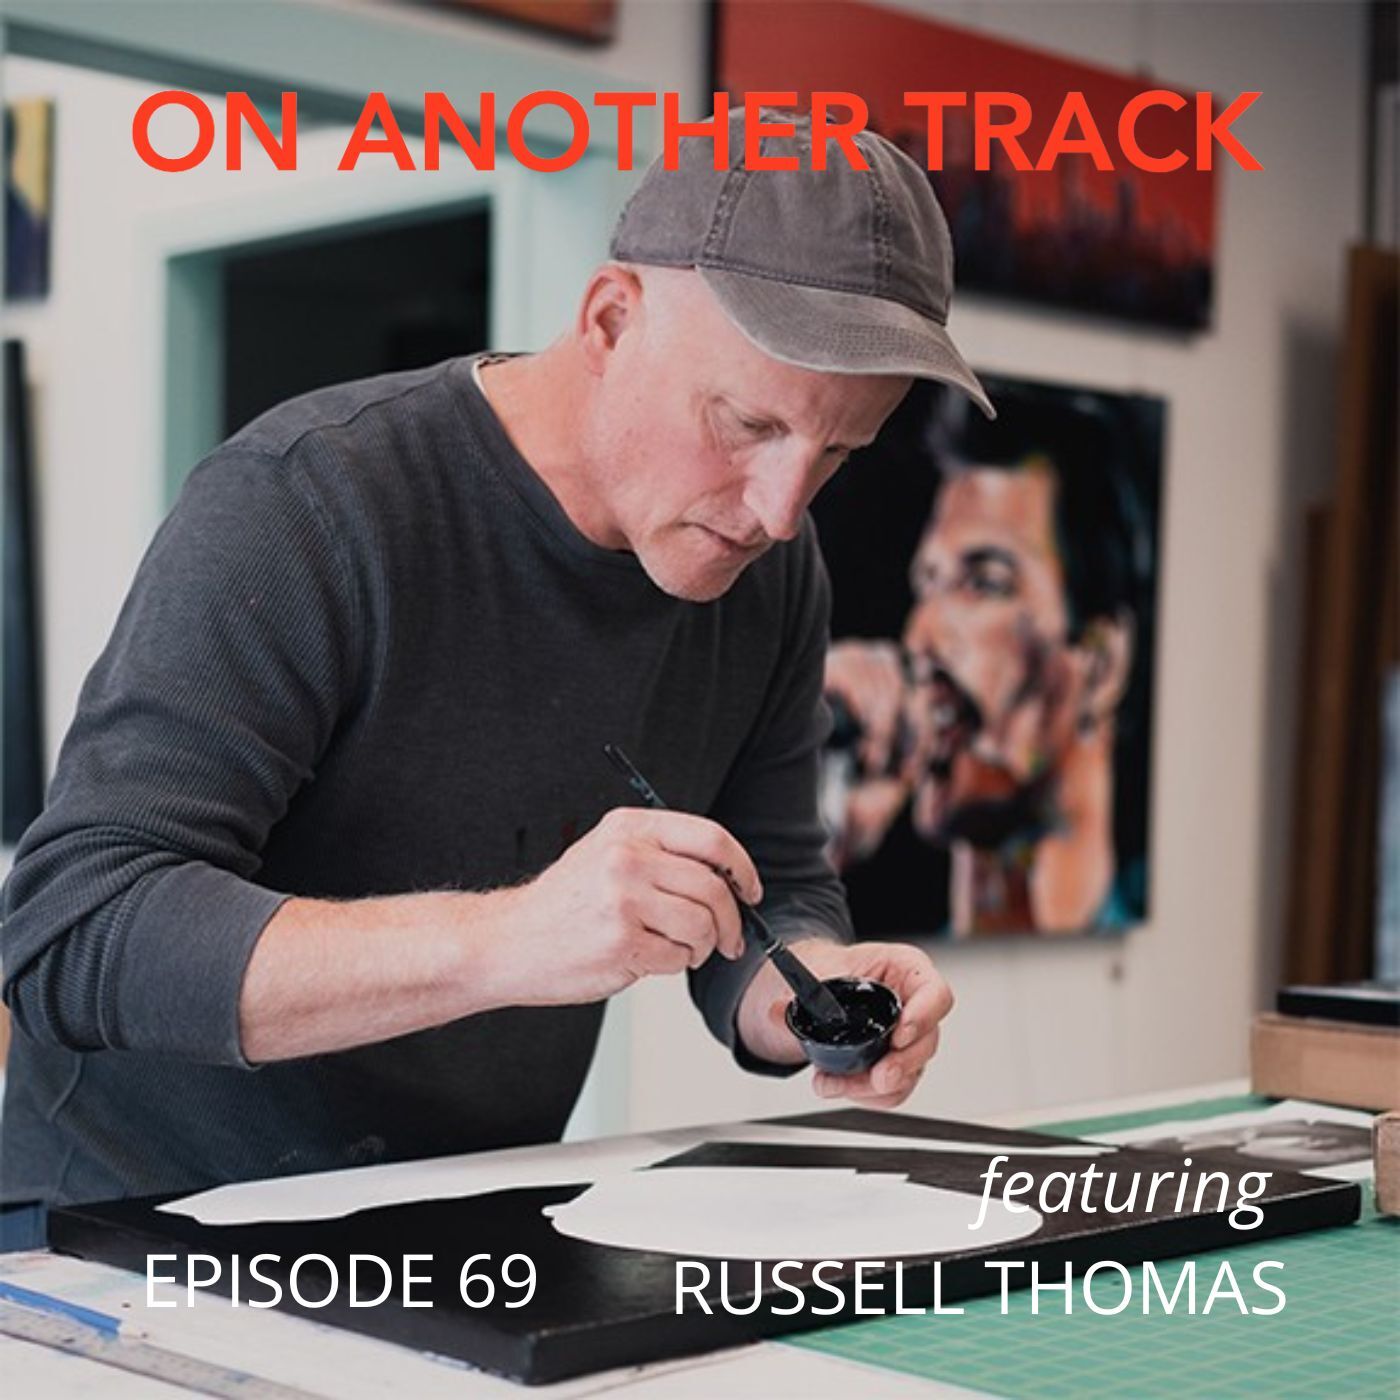 Russell Thomas - Extraordinary human connections through inspiring paintings!